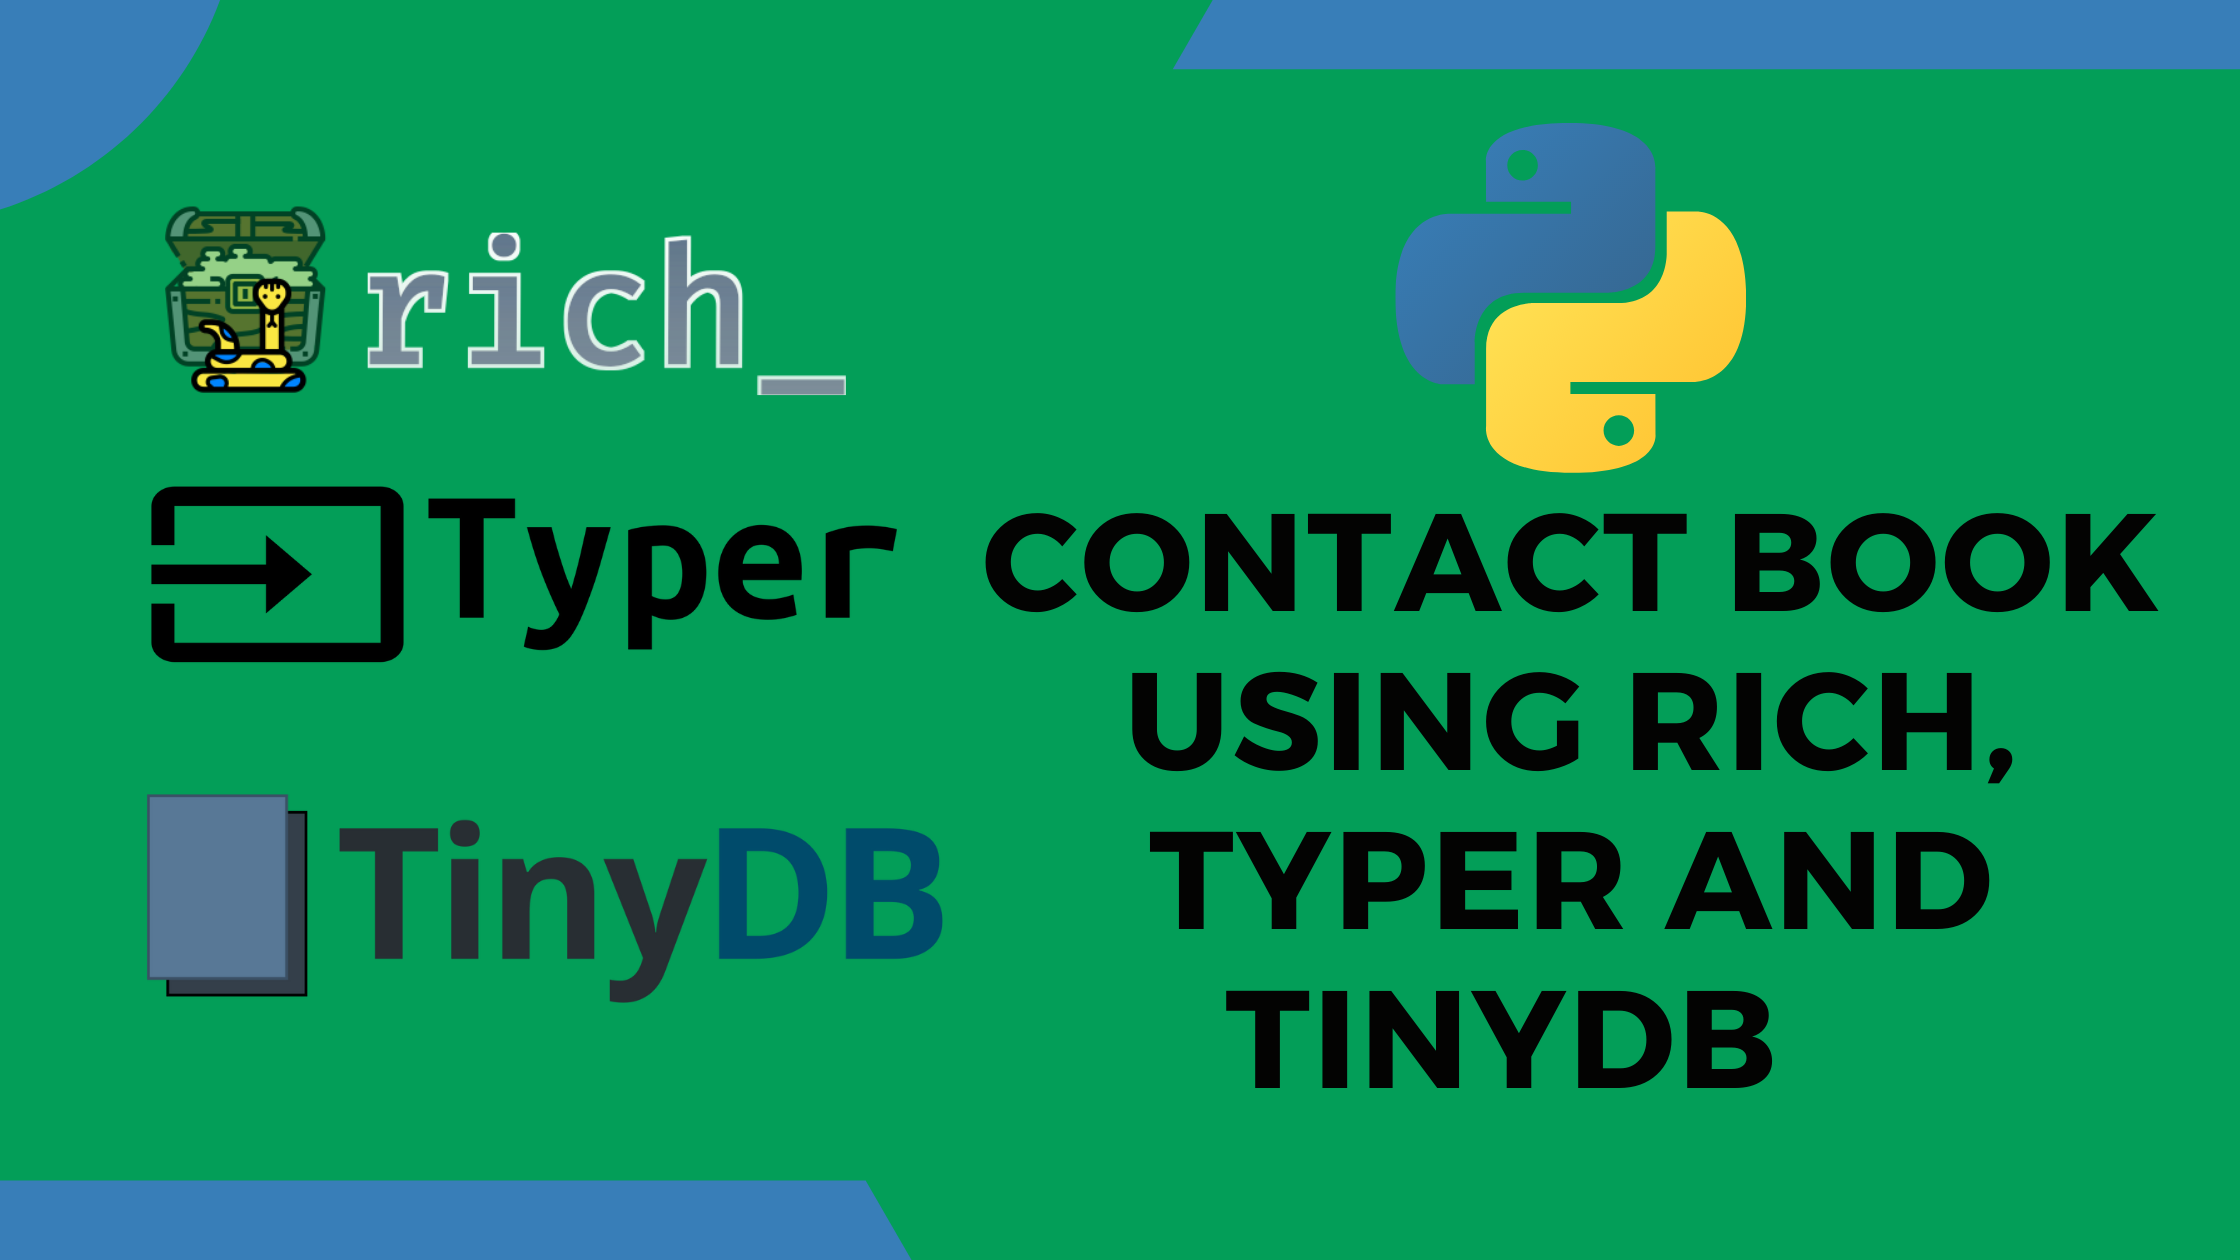 How to Build a Contact Book Application in Python using Rich, Typer, and TinyDB